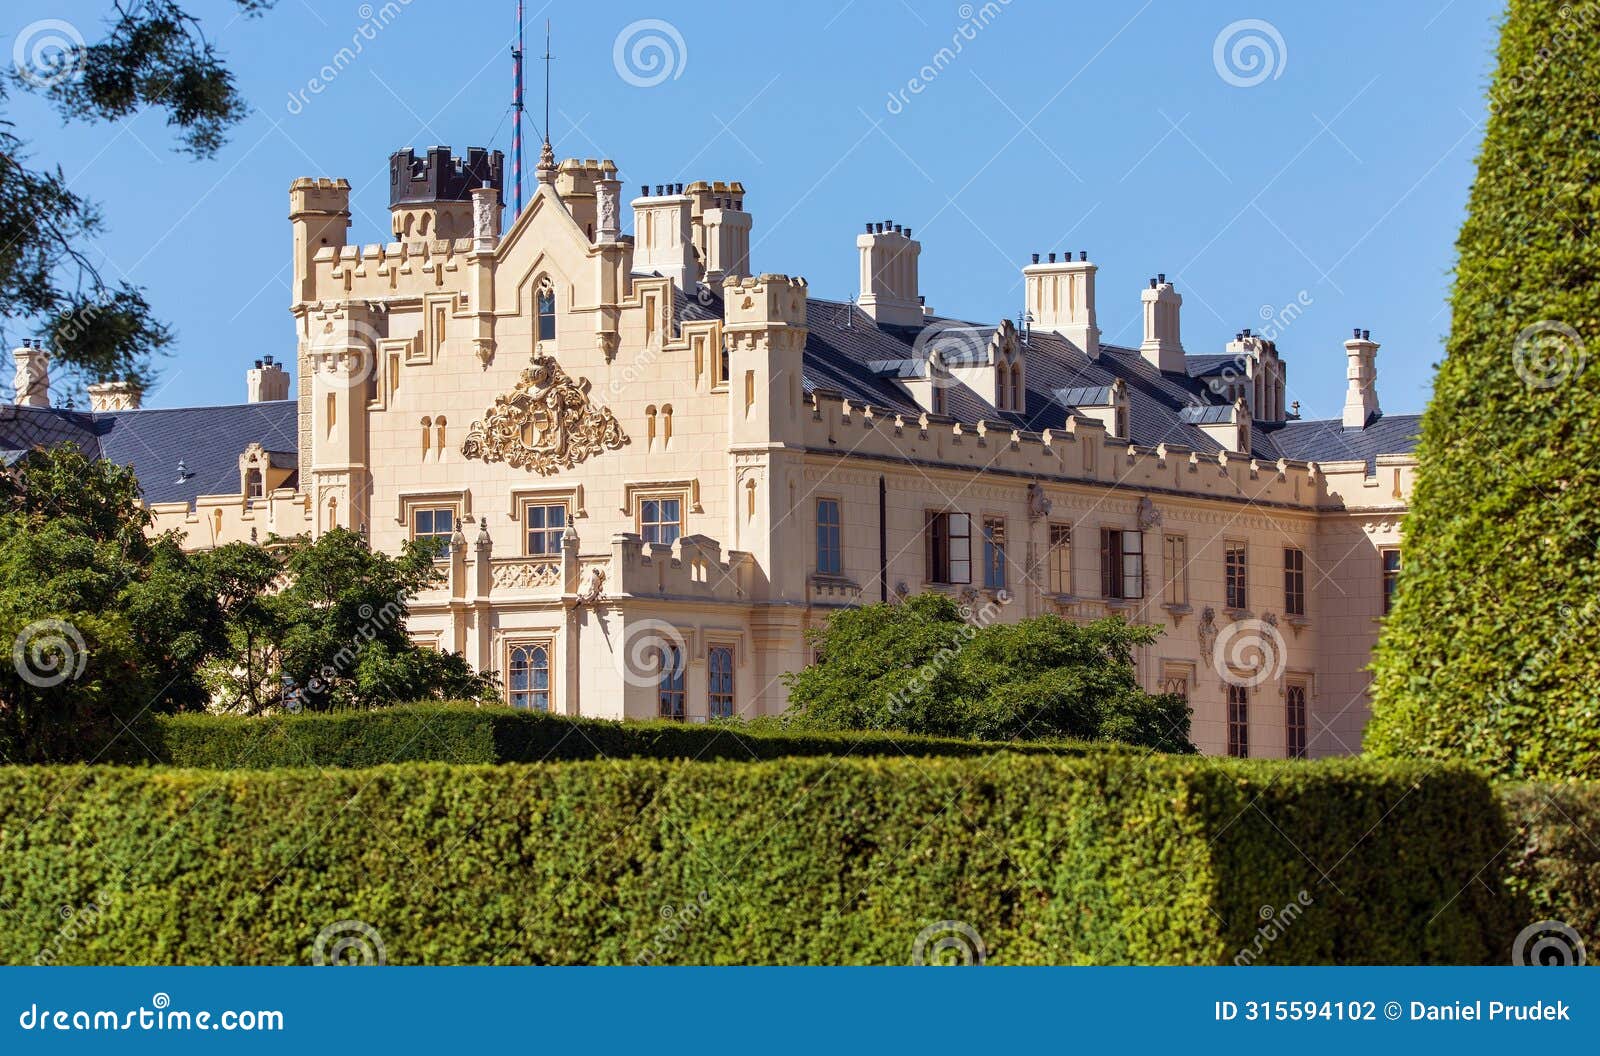 lednice chateau built in neo-gothic style czech republic